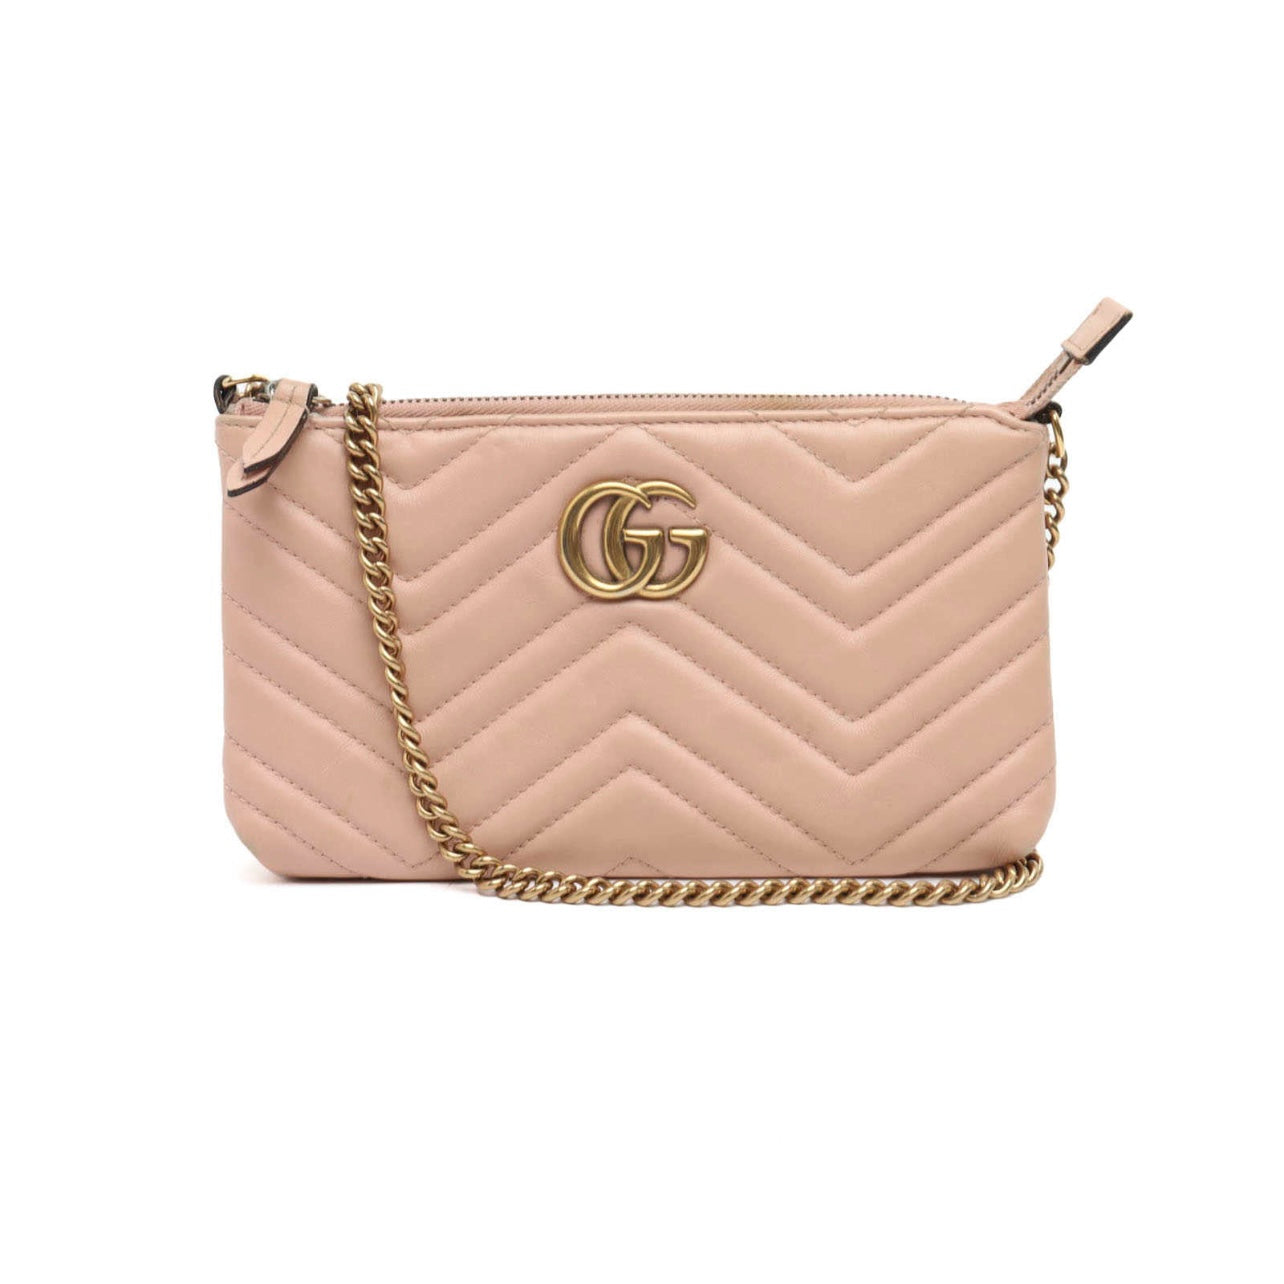 Gucci Pink Quilted Leather Marmont Mini Matelasse Shoulder Bag